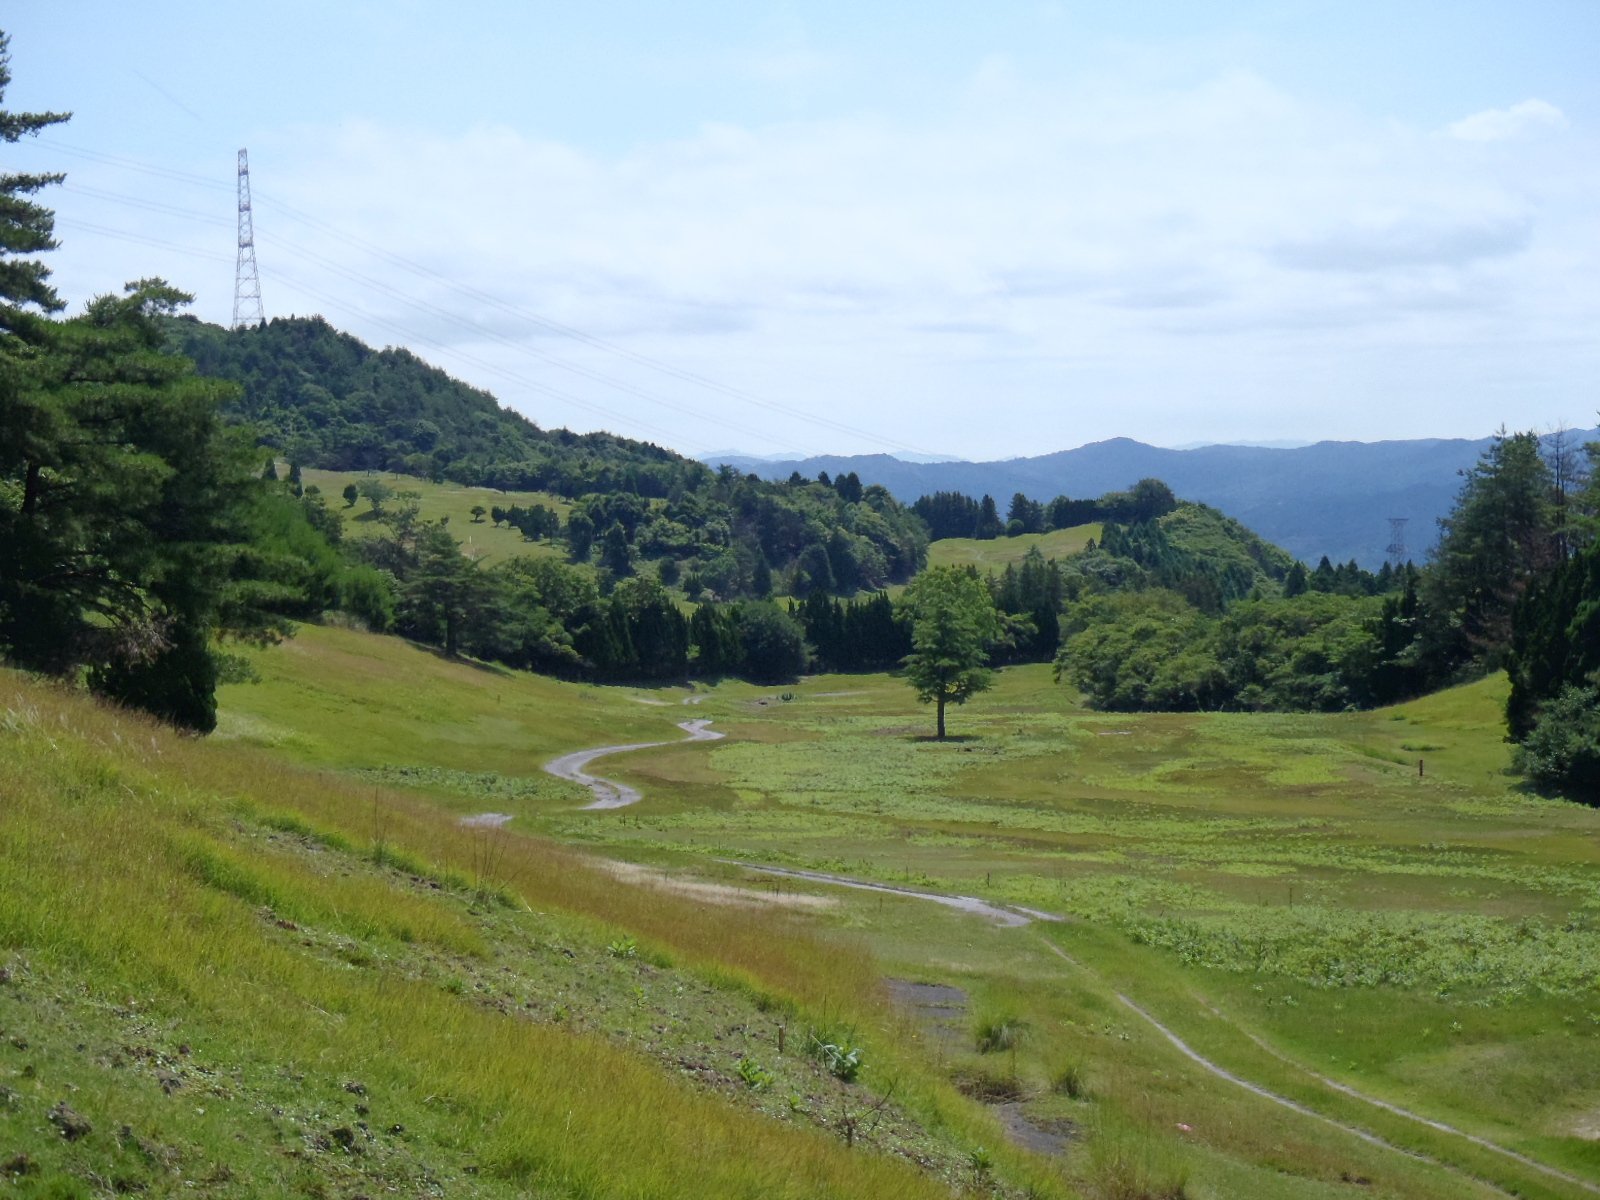 Japan’s Abandoned Golf Courses Are Being Transformed Into Solar Power Farms!